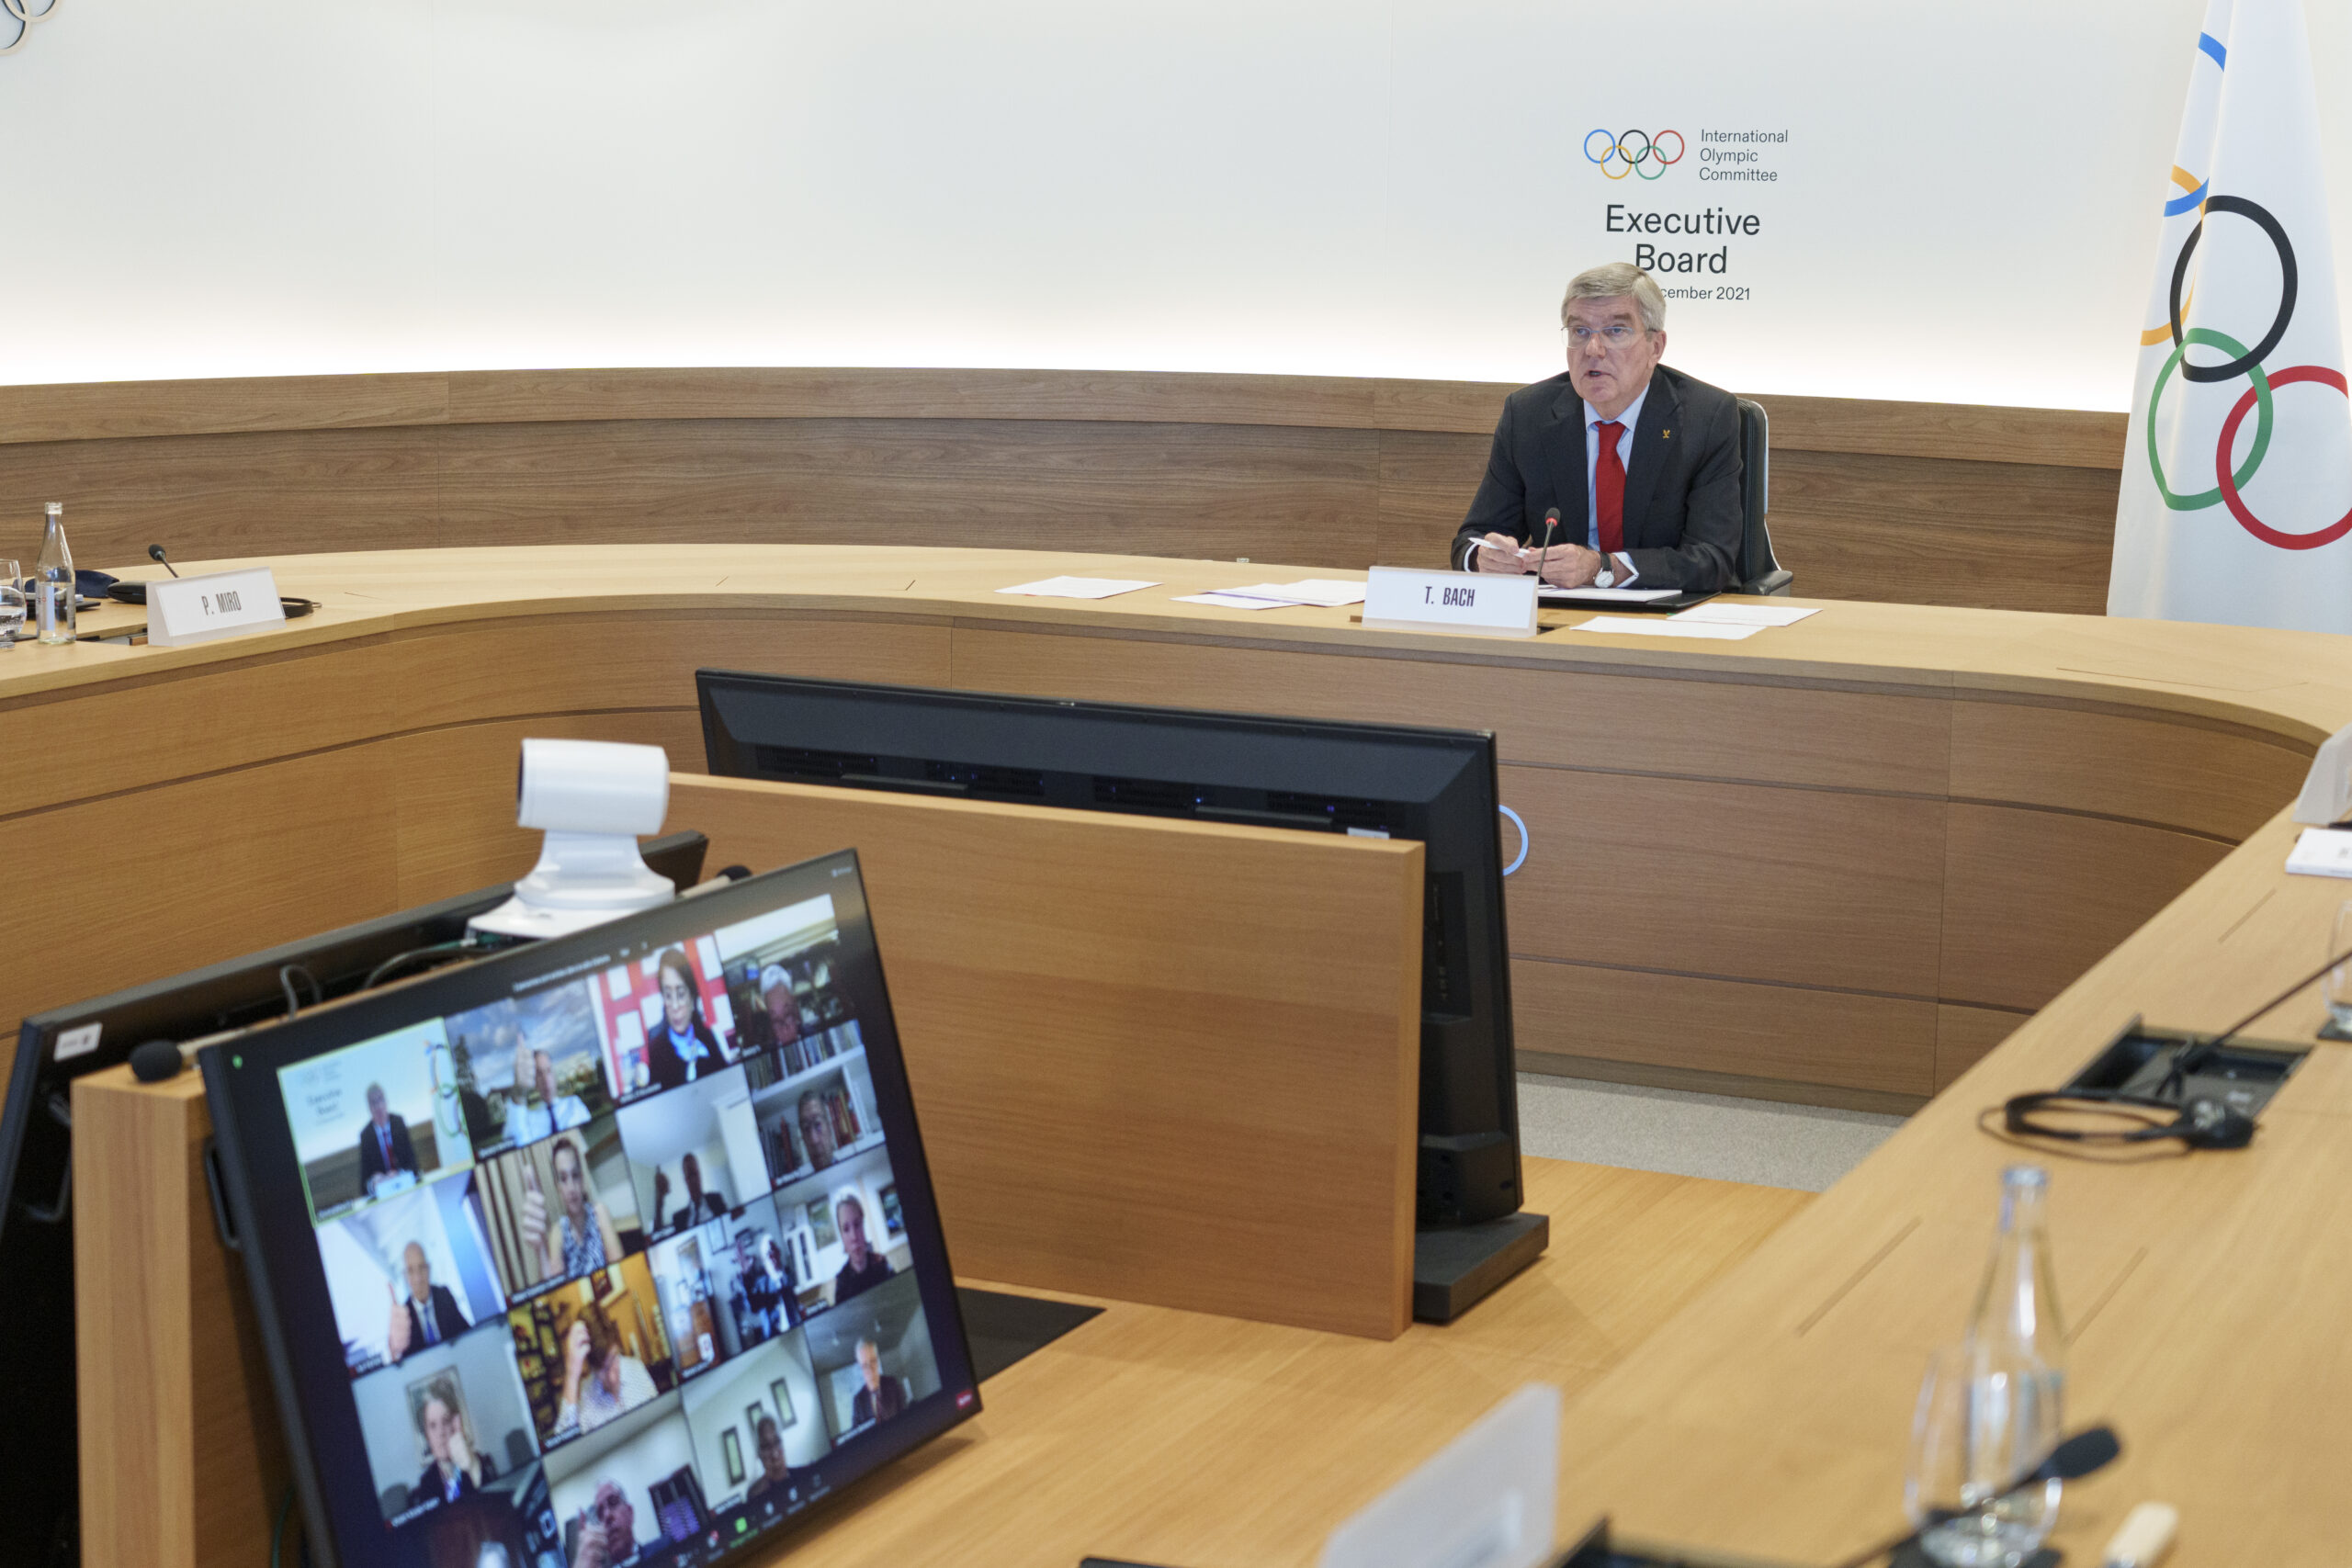 Lausanne | SwitzerlandIOC President, Thomas Bach chairs the Executive Board meeting held in Olympic House. Photograph by IOC/Greg Martin